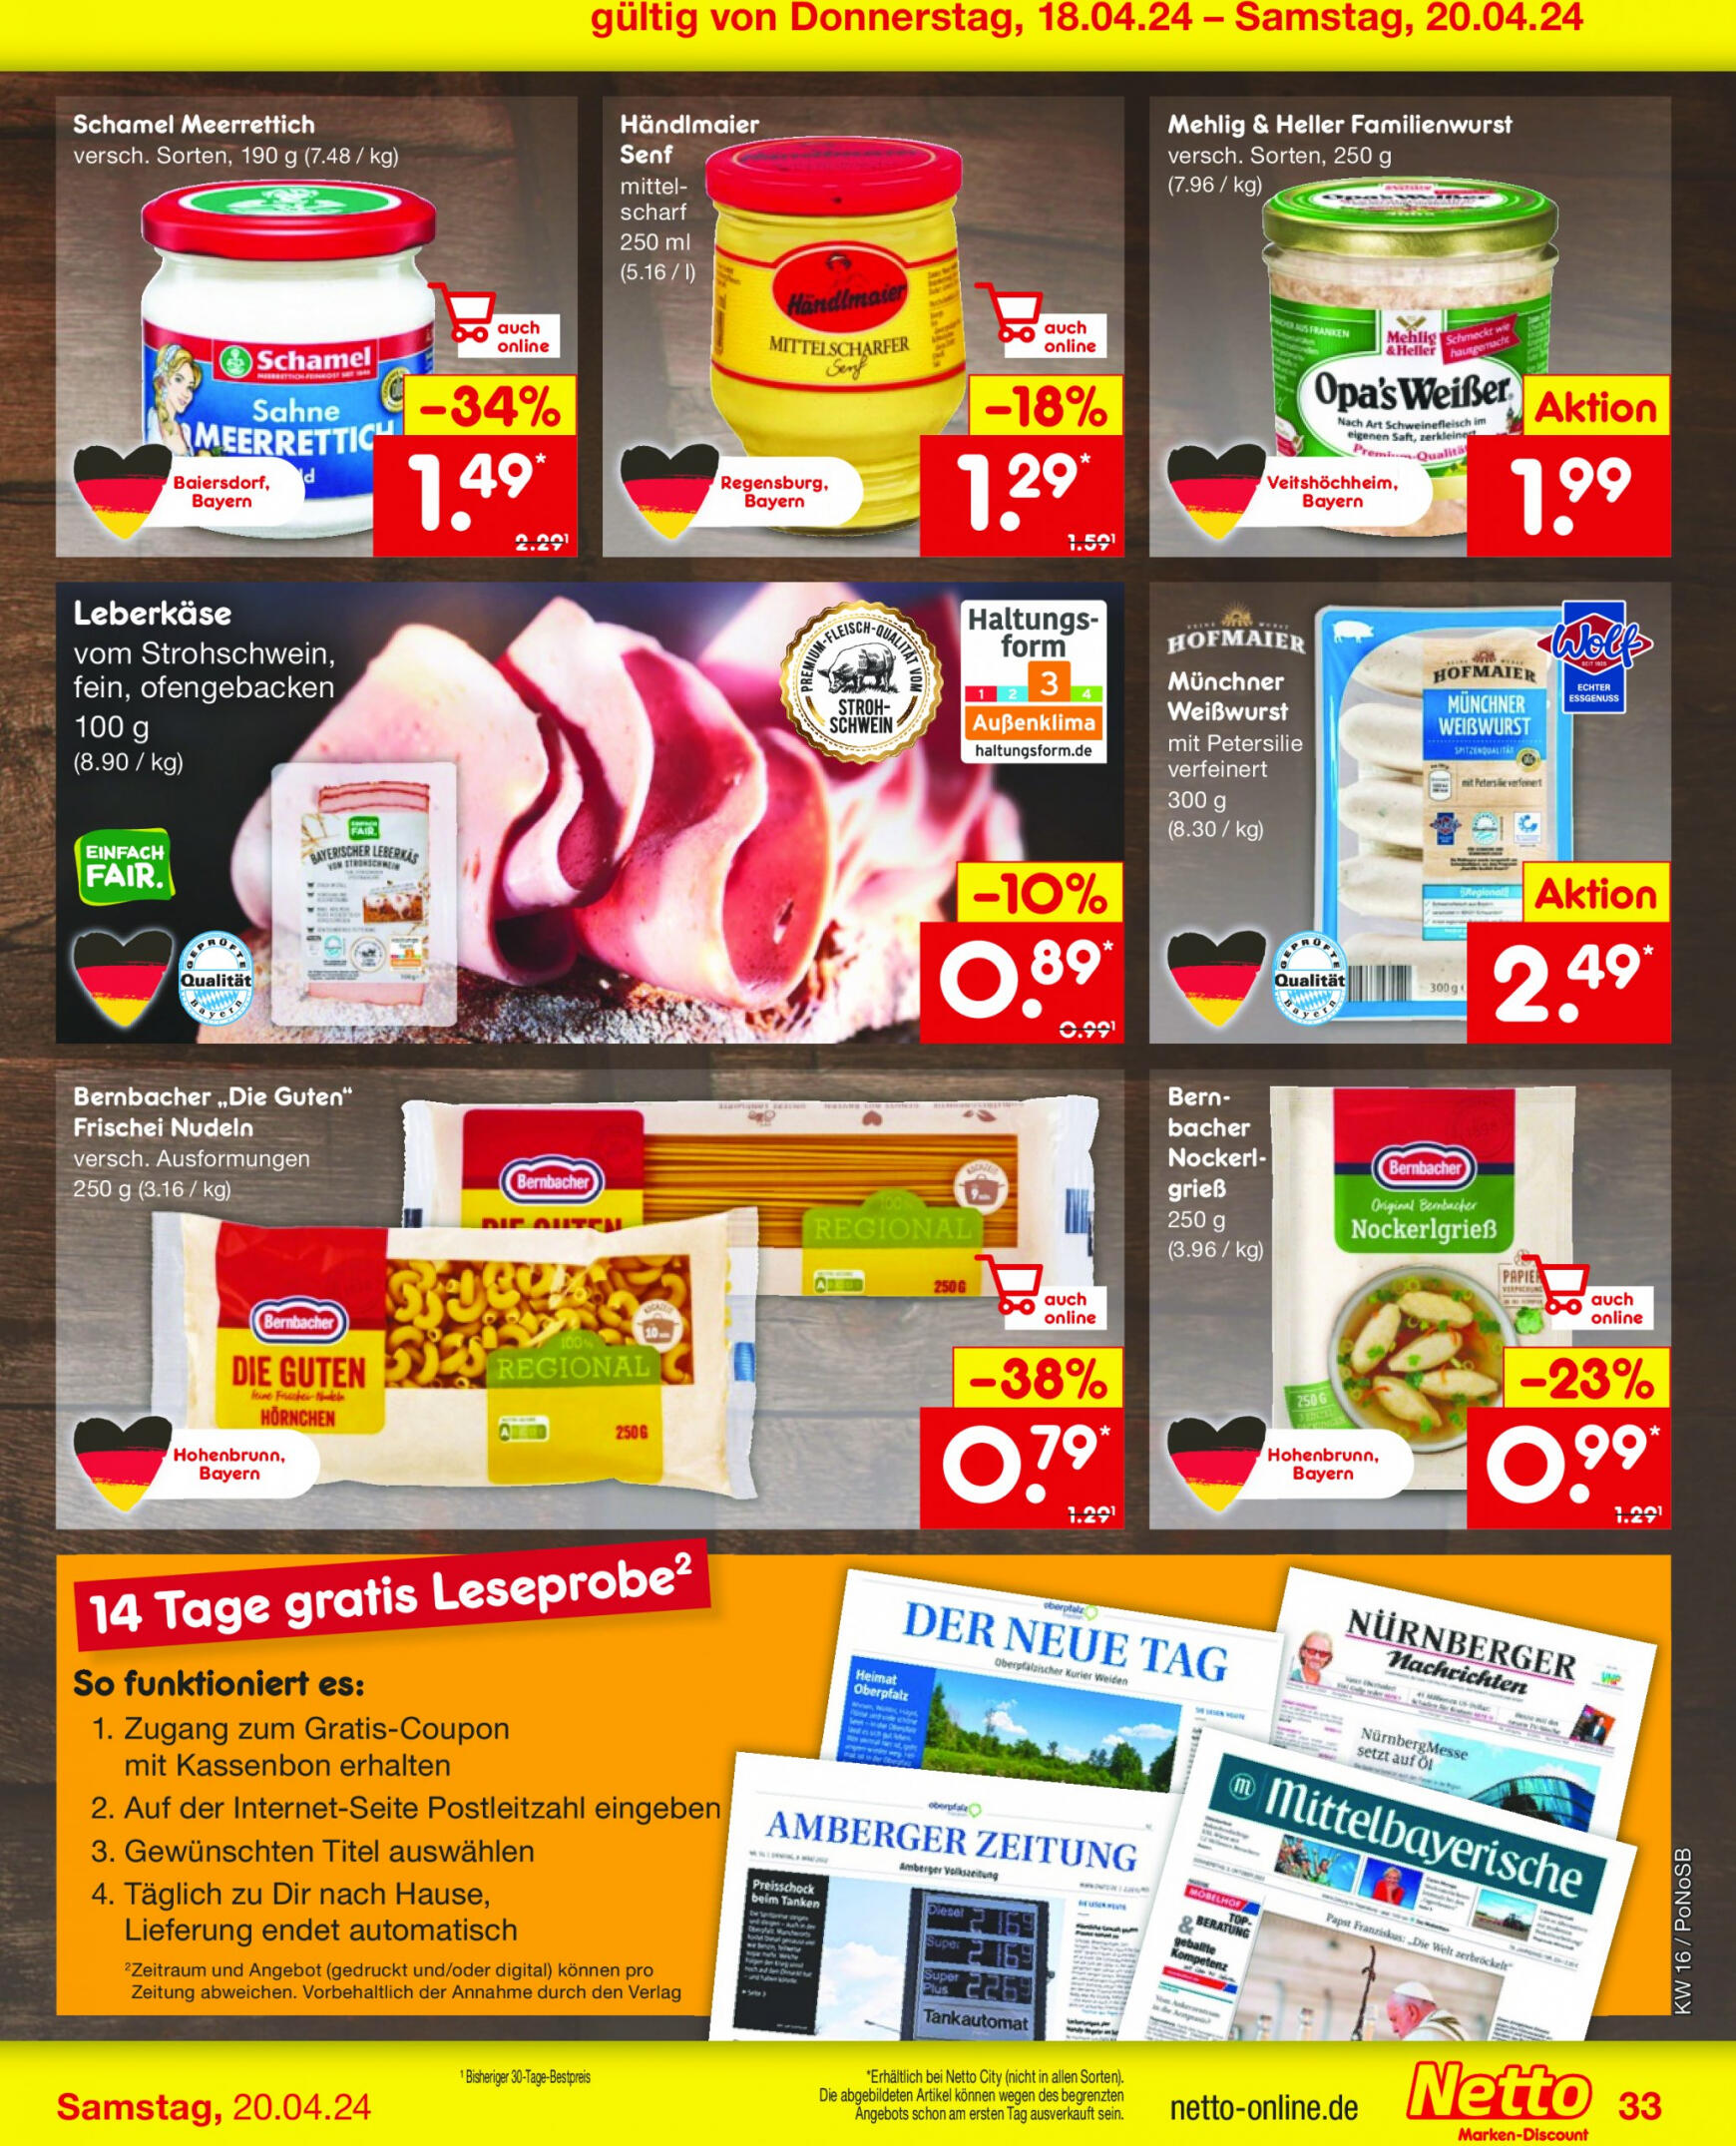 netto - Flyer Netto aktuell 15.04. - 20.04. - page: 39